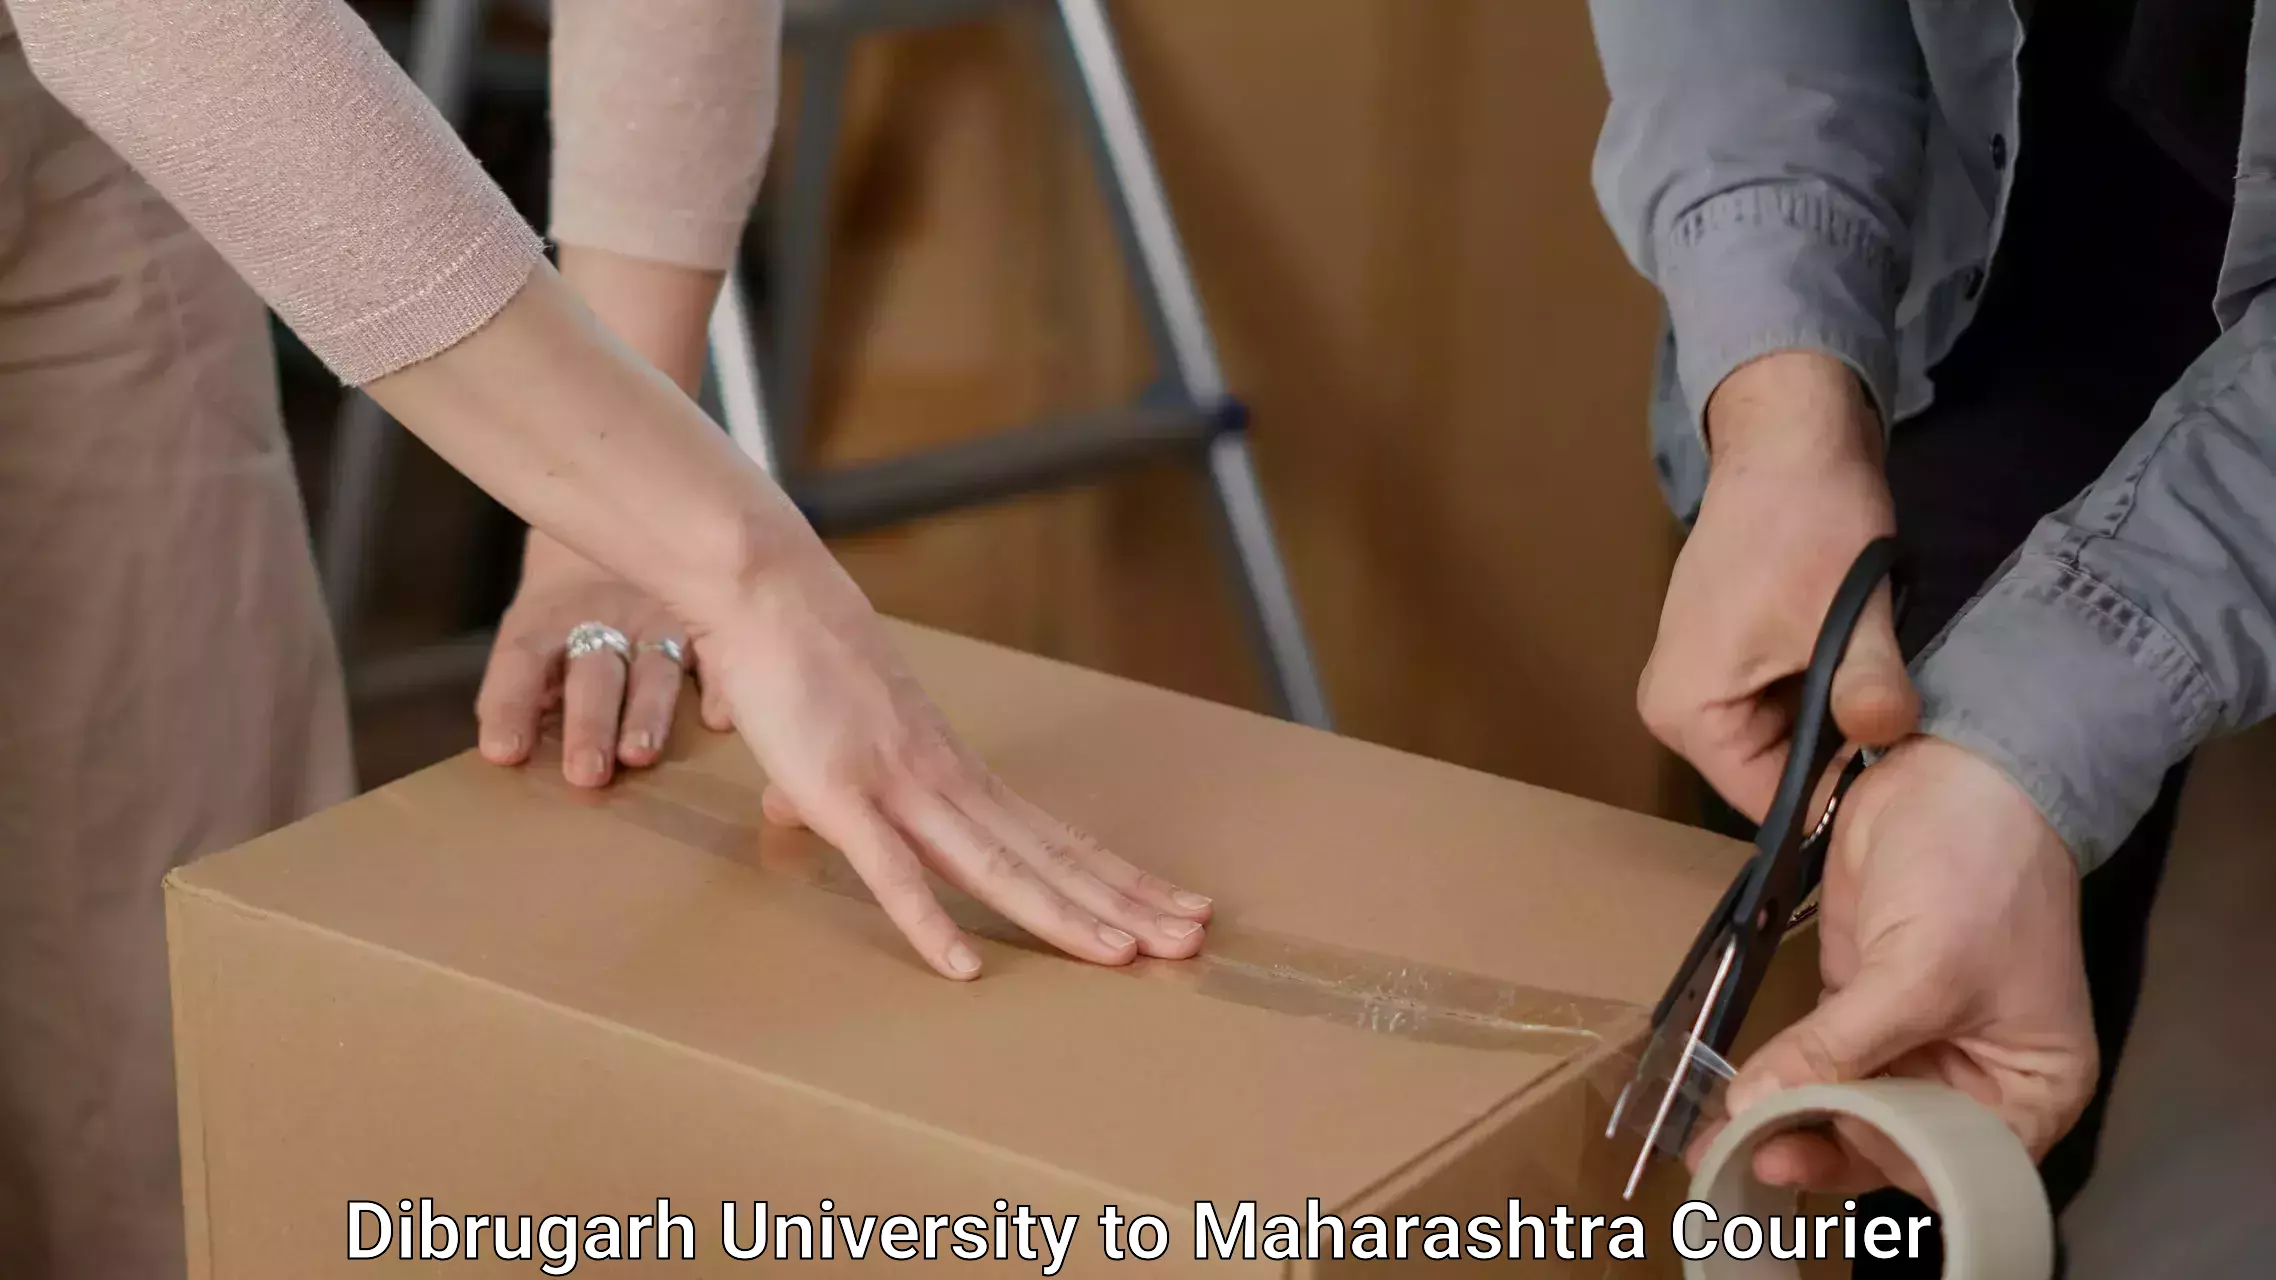 Furniture moving assistance Dibrugarh University to Oras